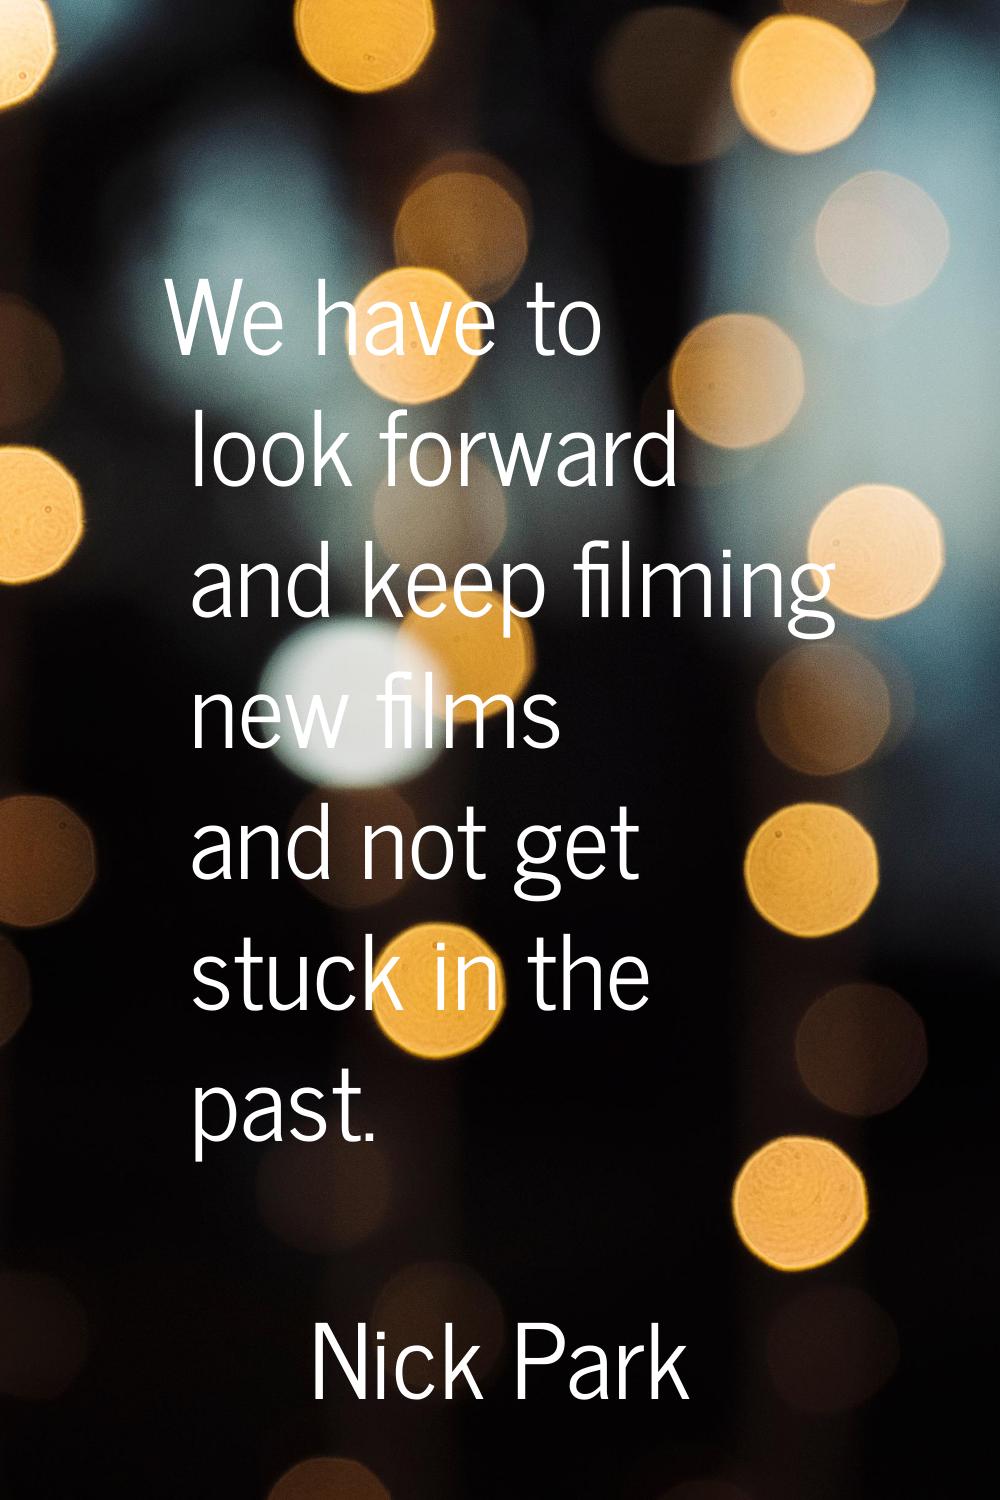 We have to look forward and keep filming new films and not get stuck in the past.